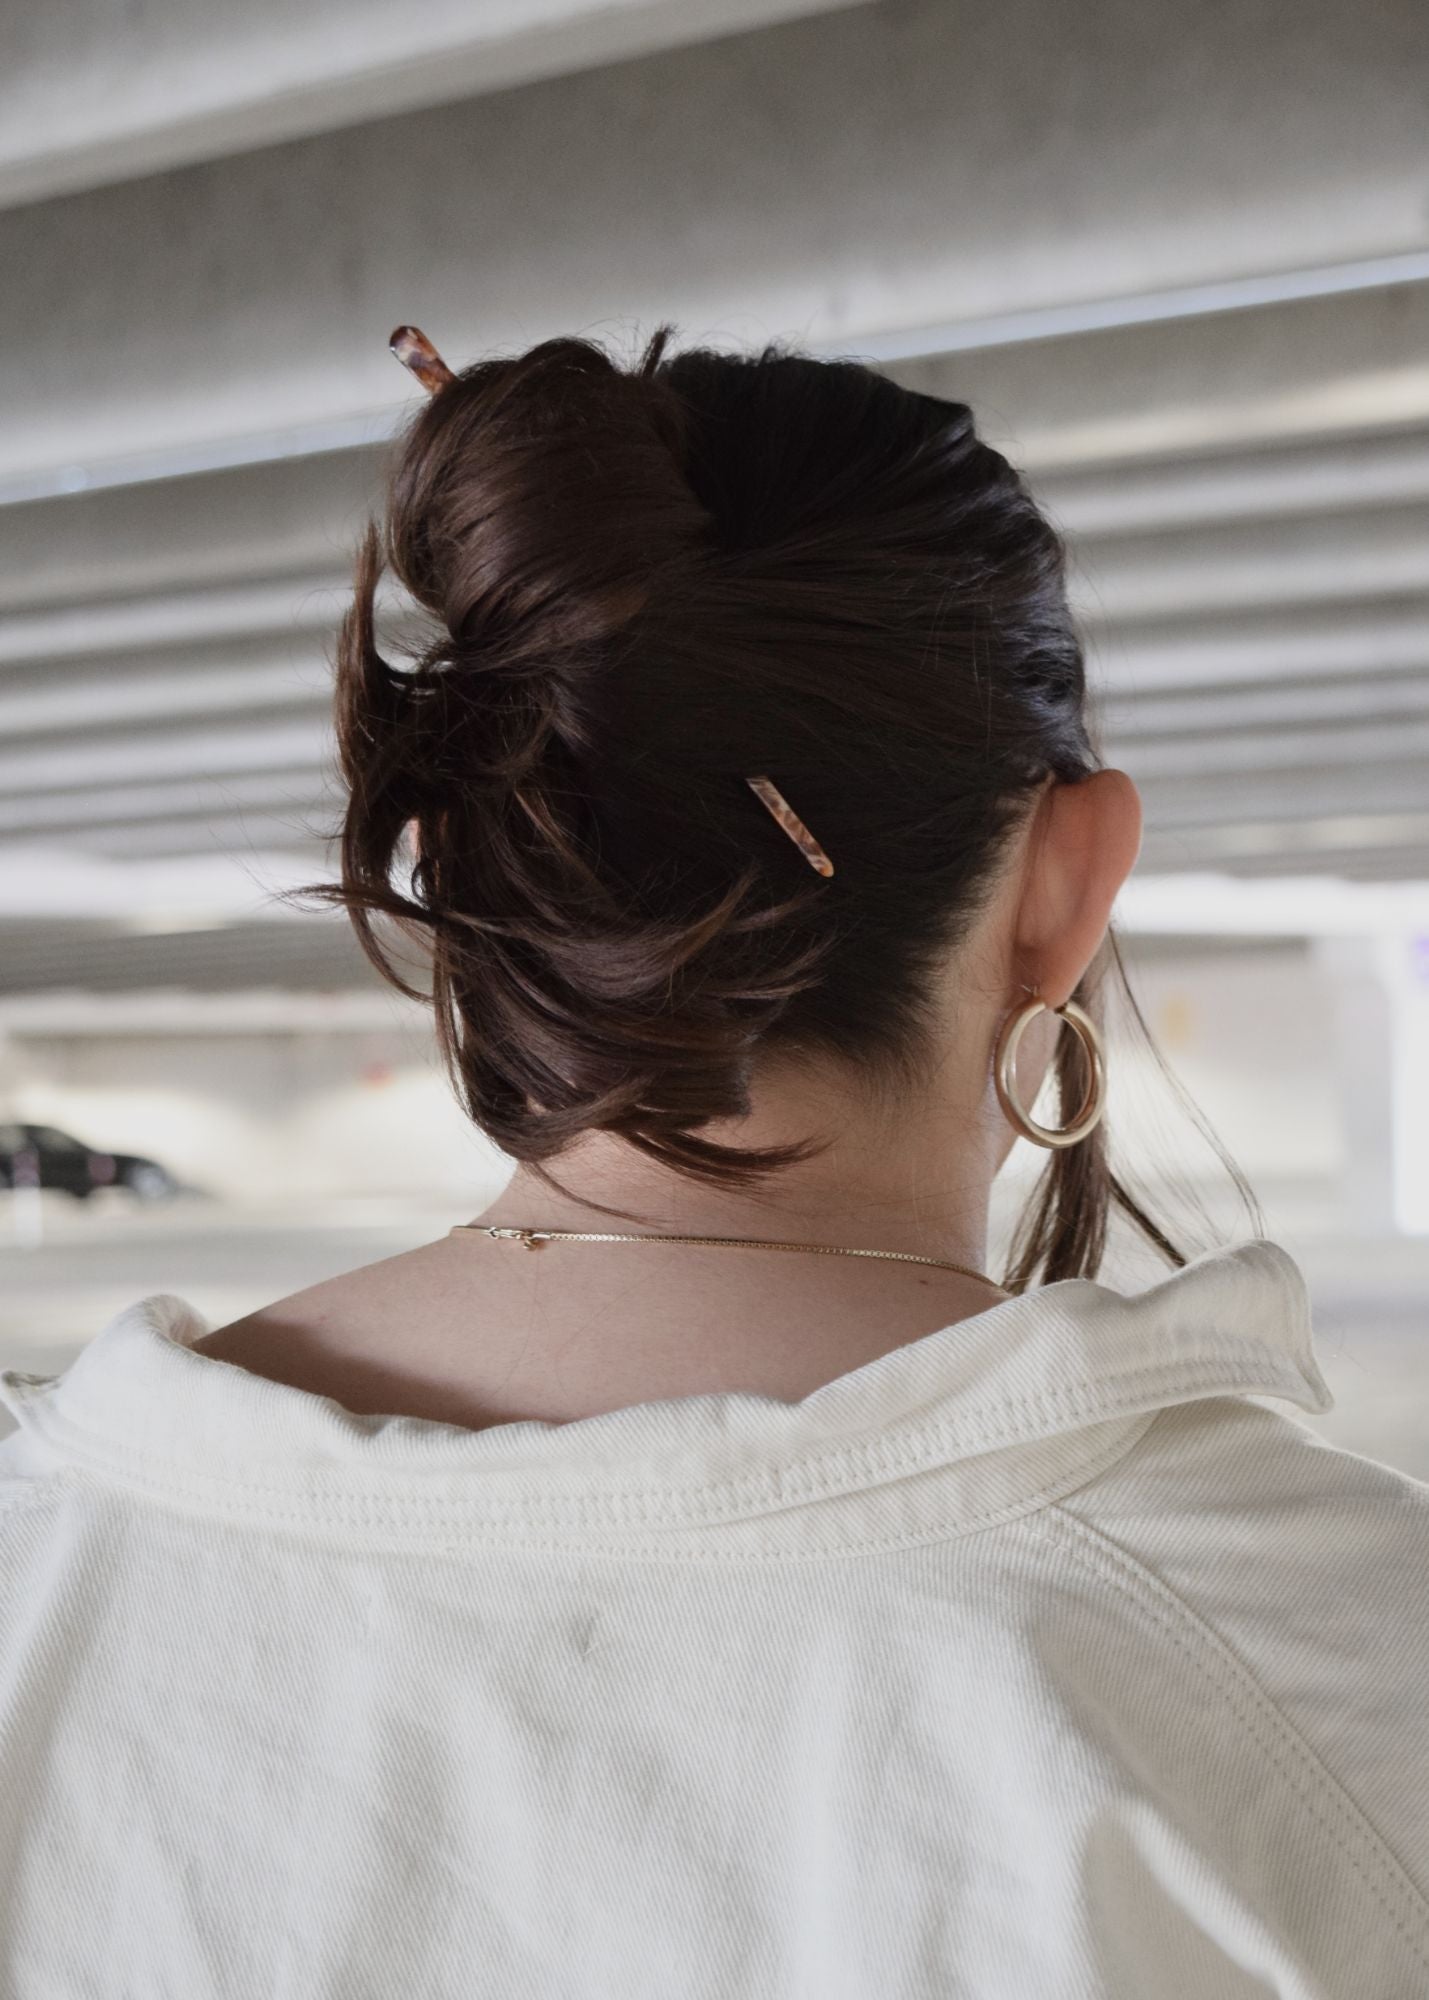 How To Use A Chic French Hair Pin For Your Next Updo